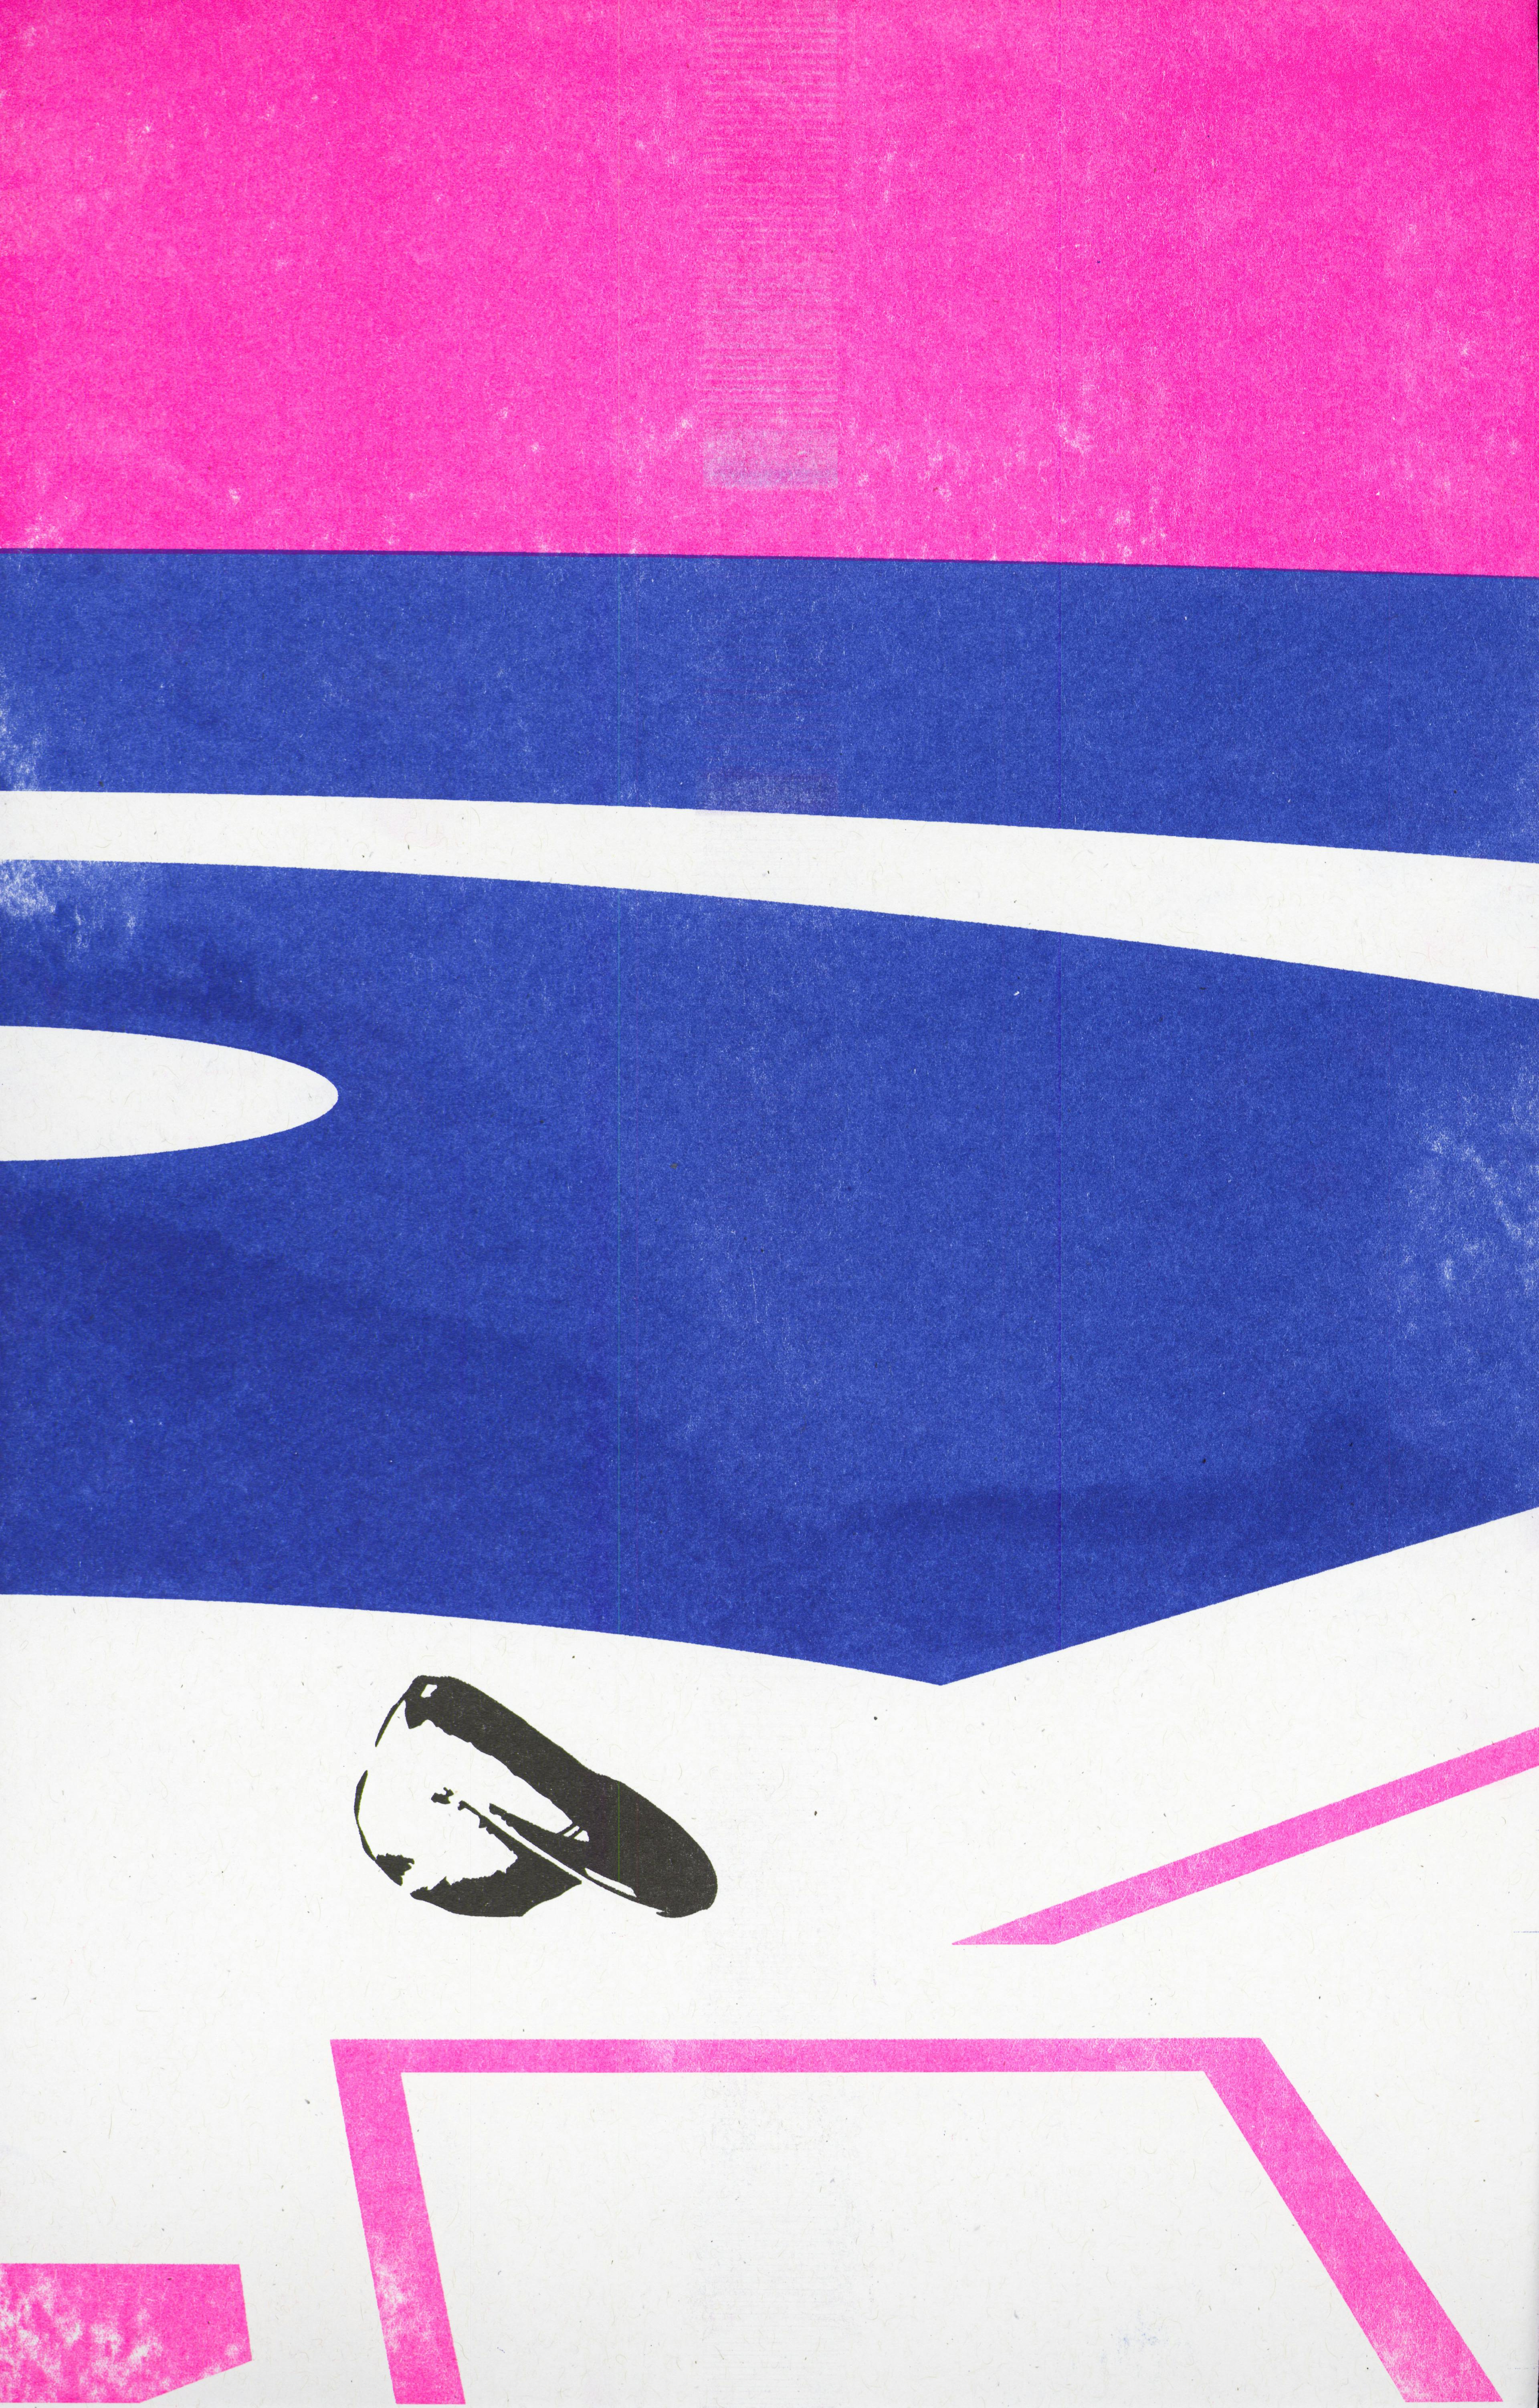 Blue and pink riso print of baseball field